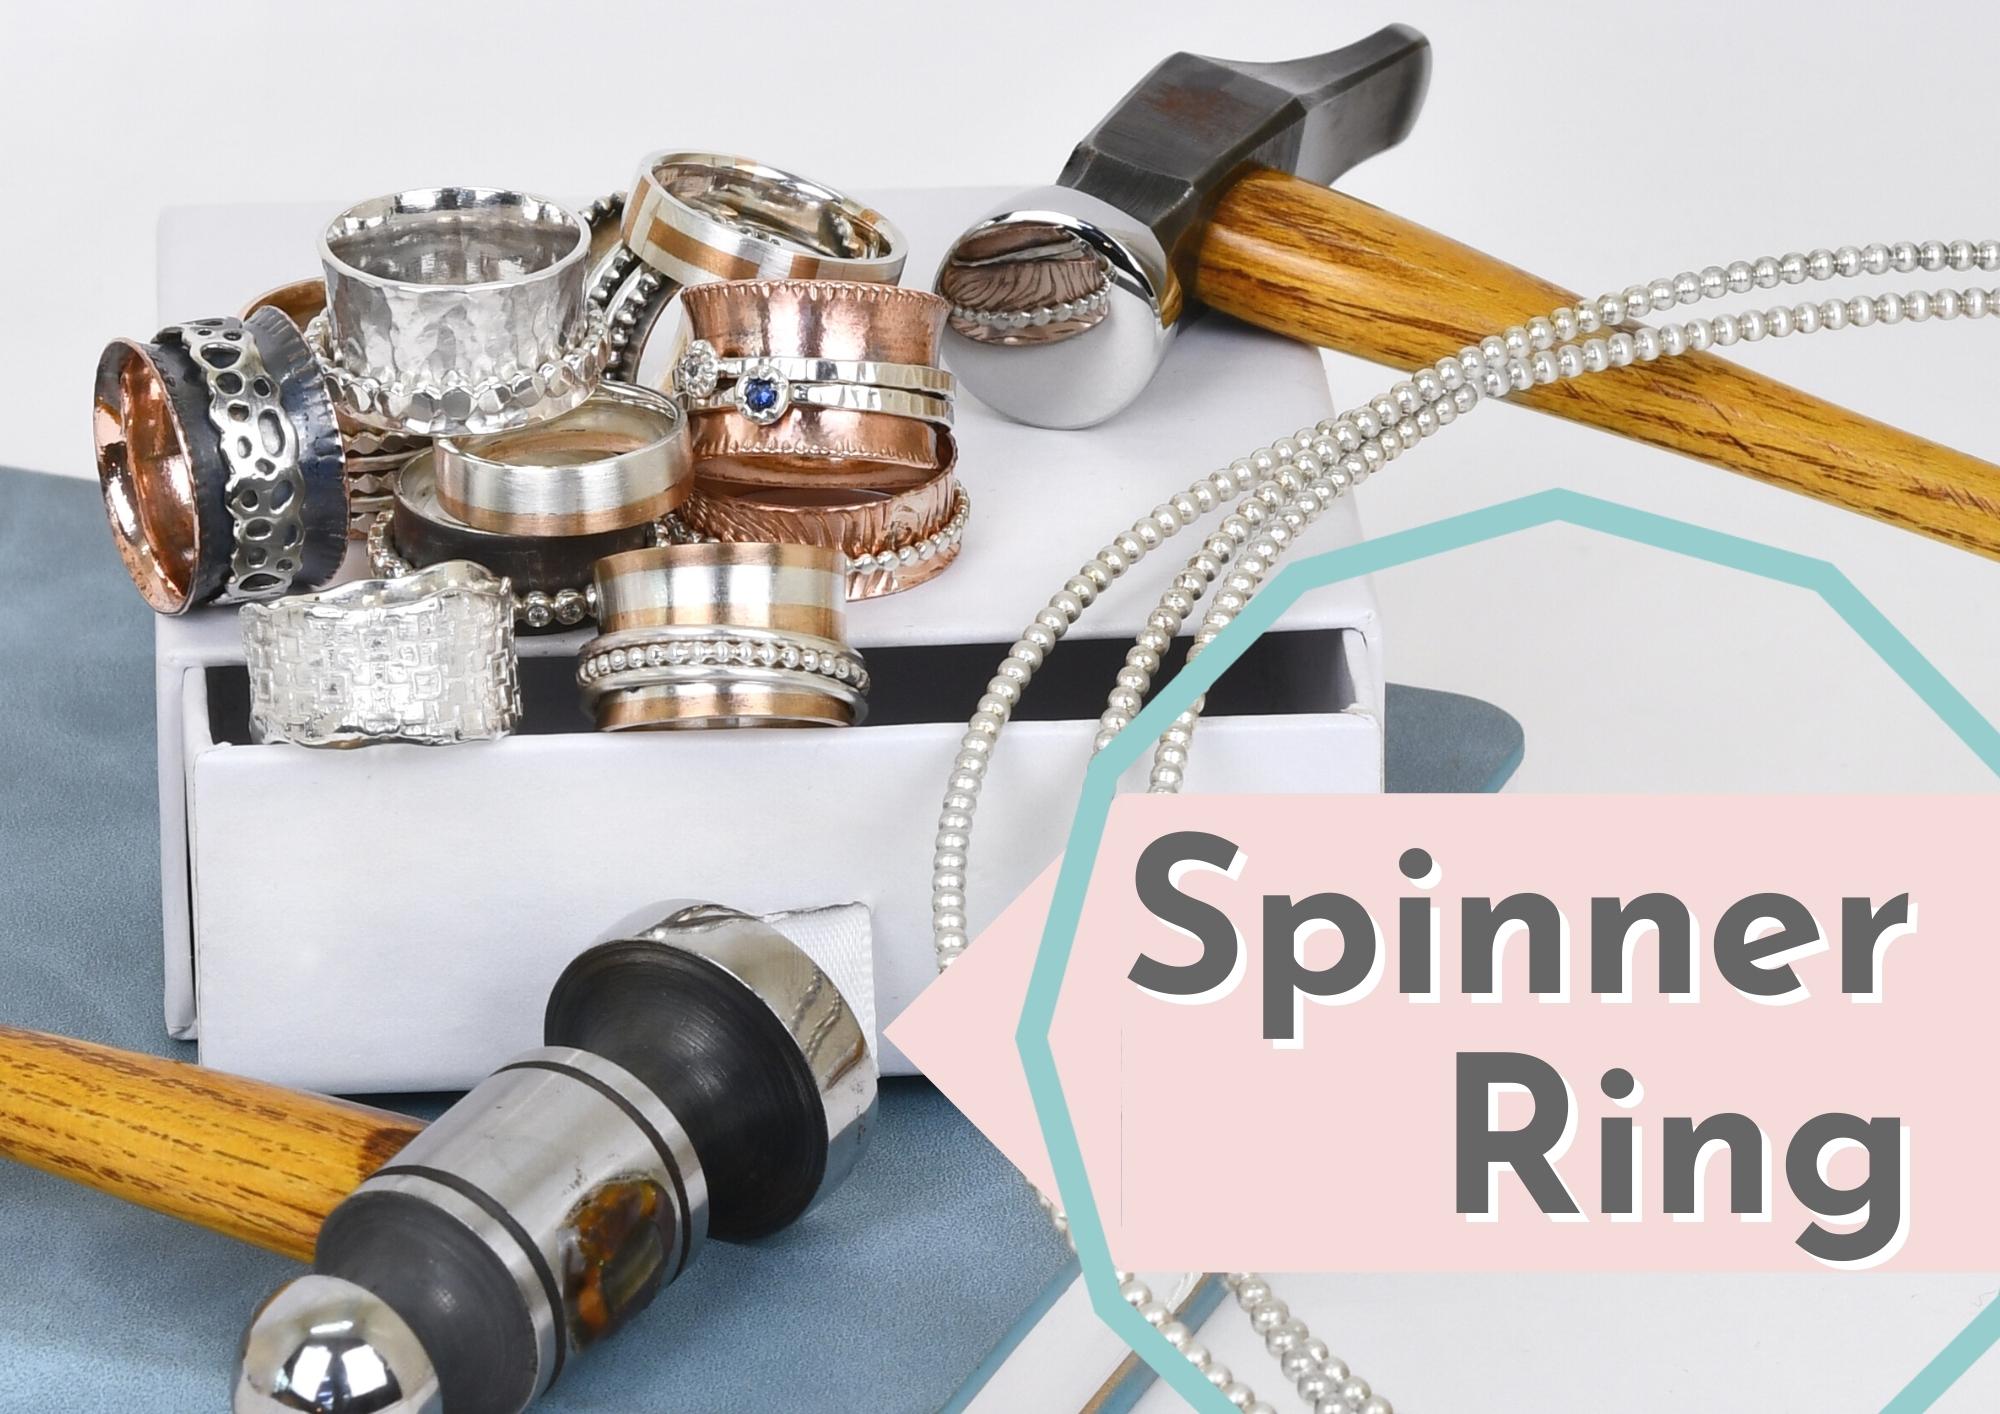 Learn to make a spinner ring in our jewellery making class